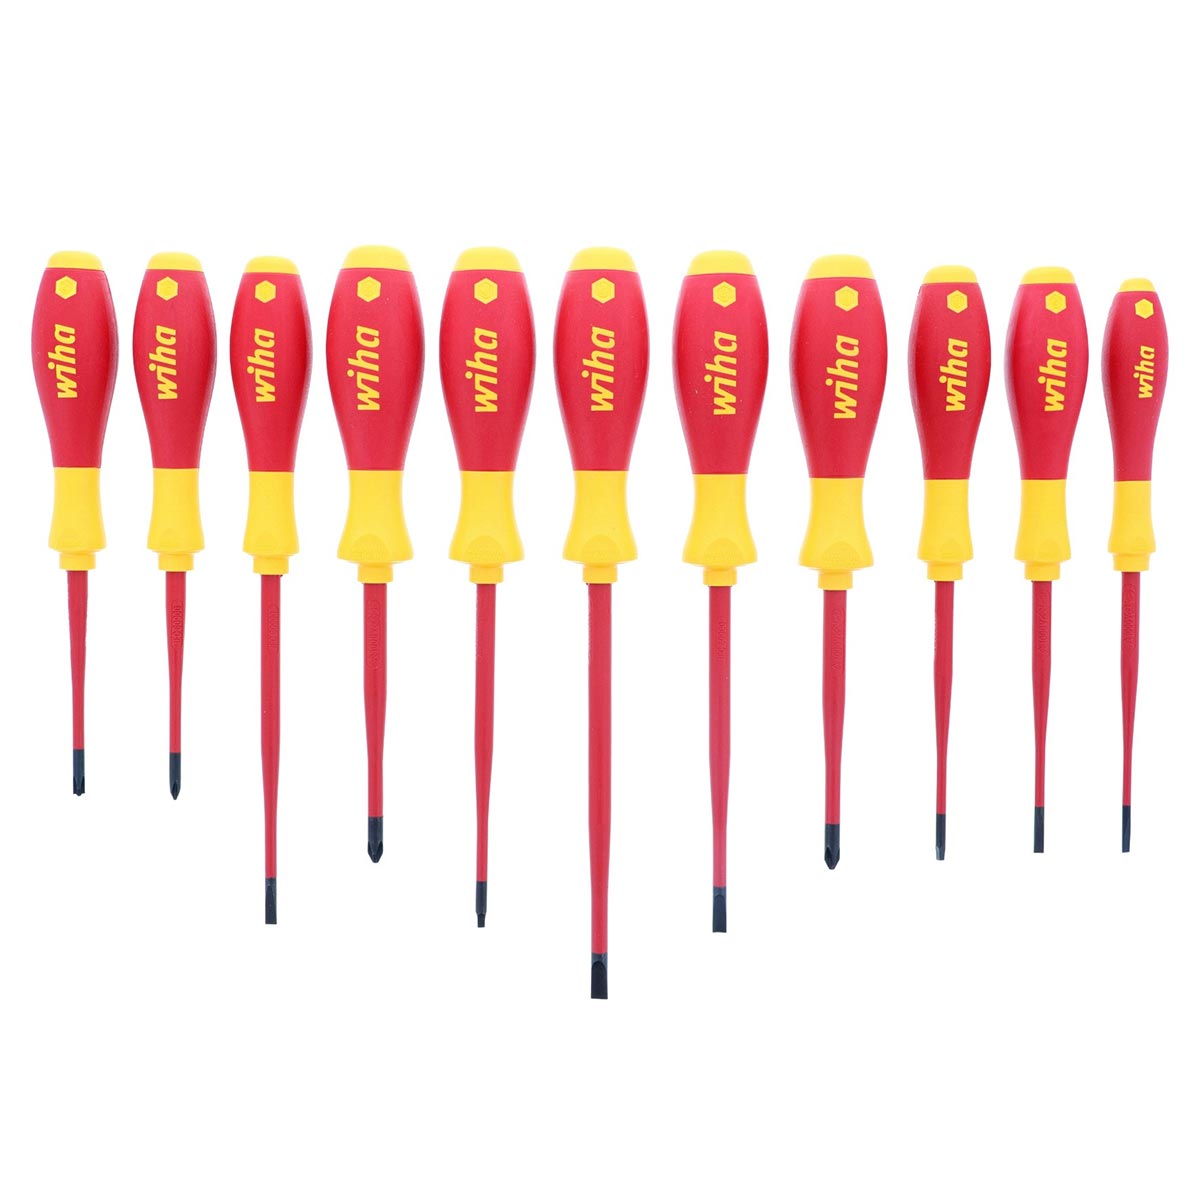 Wiha Insulated Slimline Slotted Phillips Square And Xeno Screwdrivers - 11 Piece Set